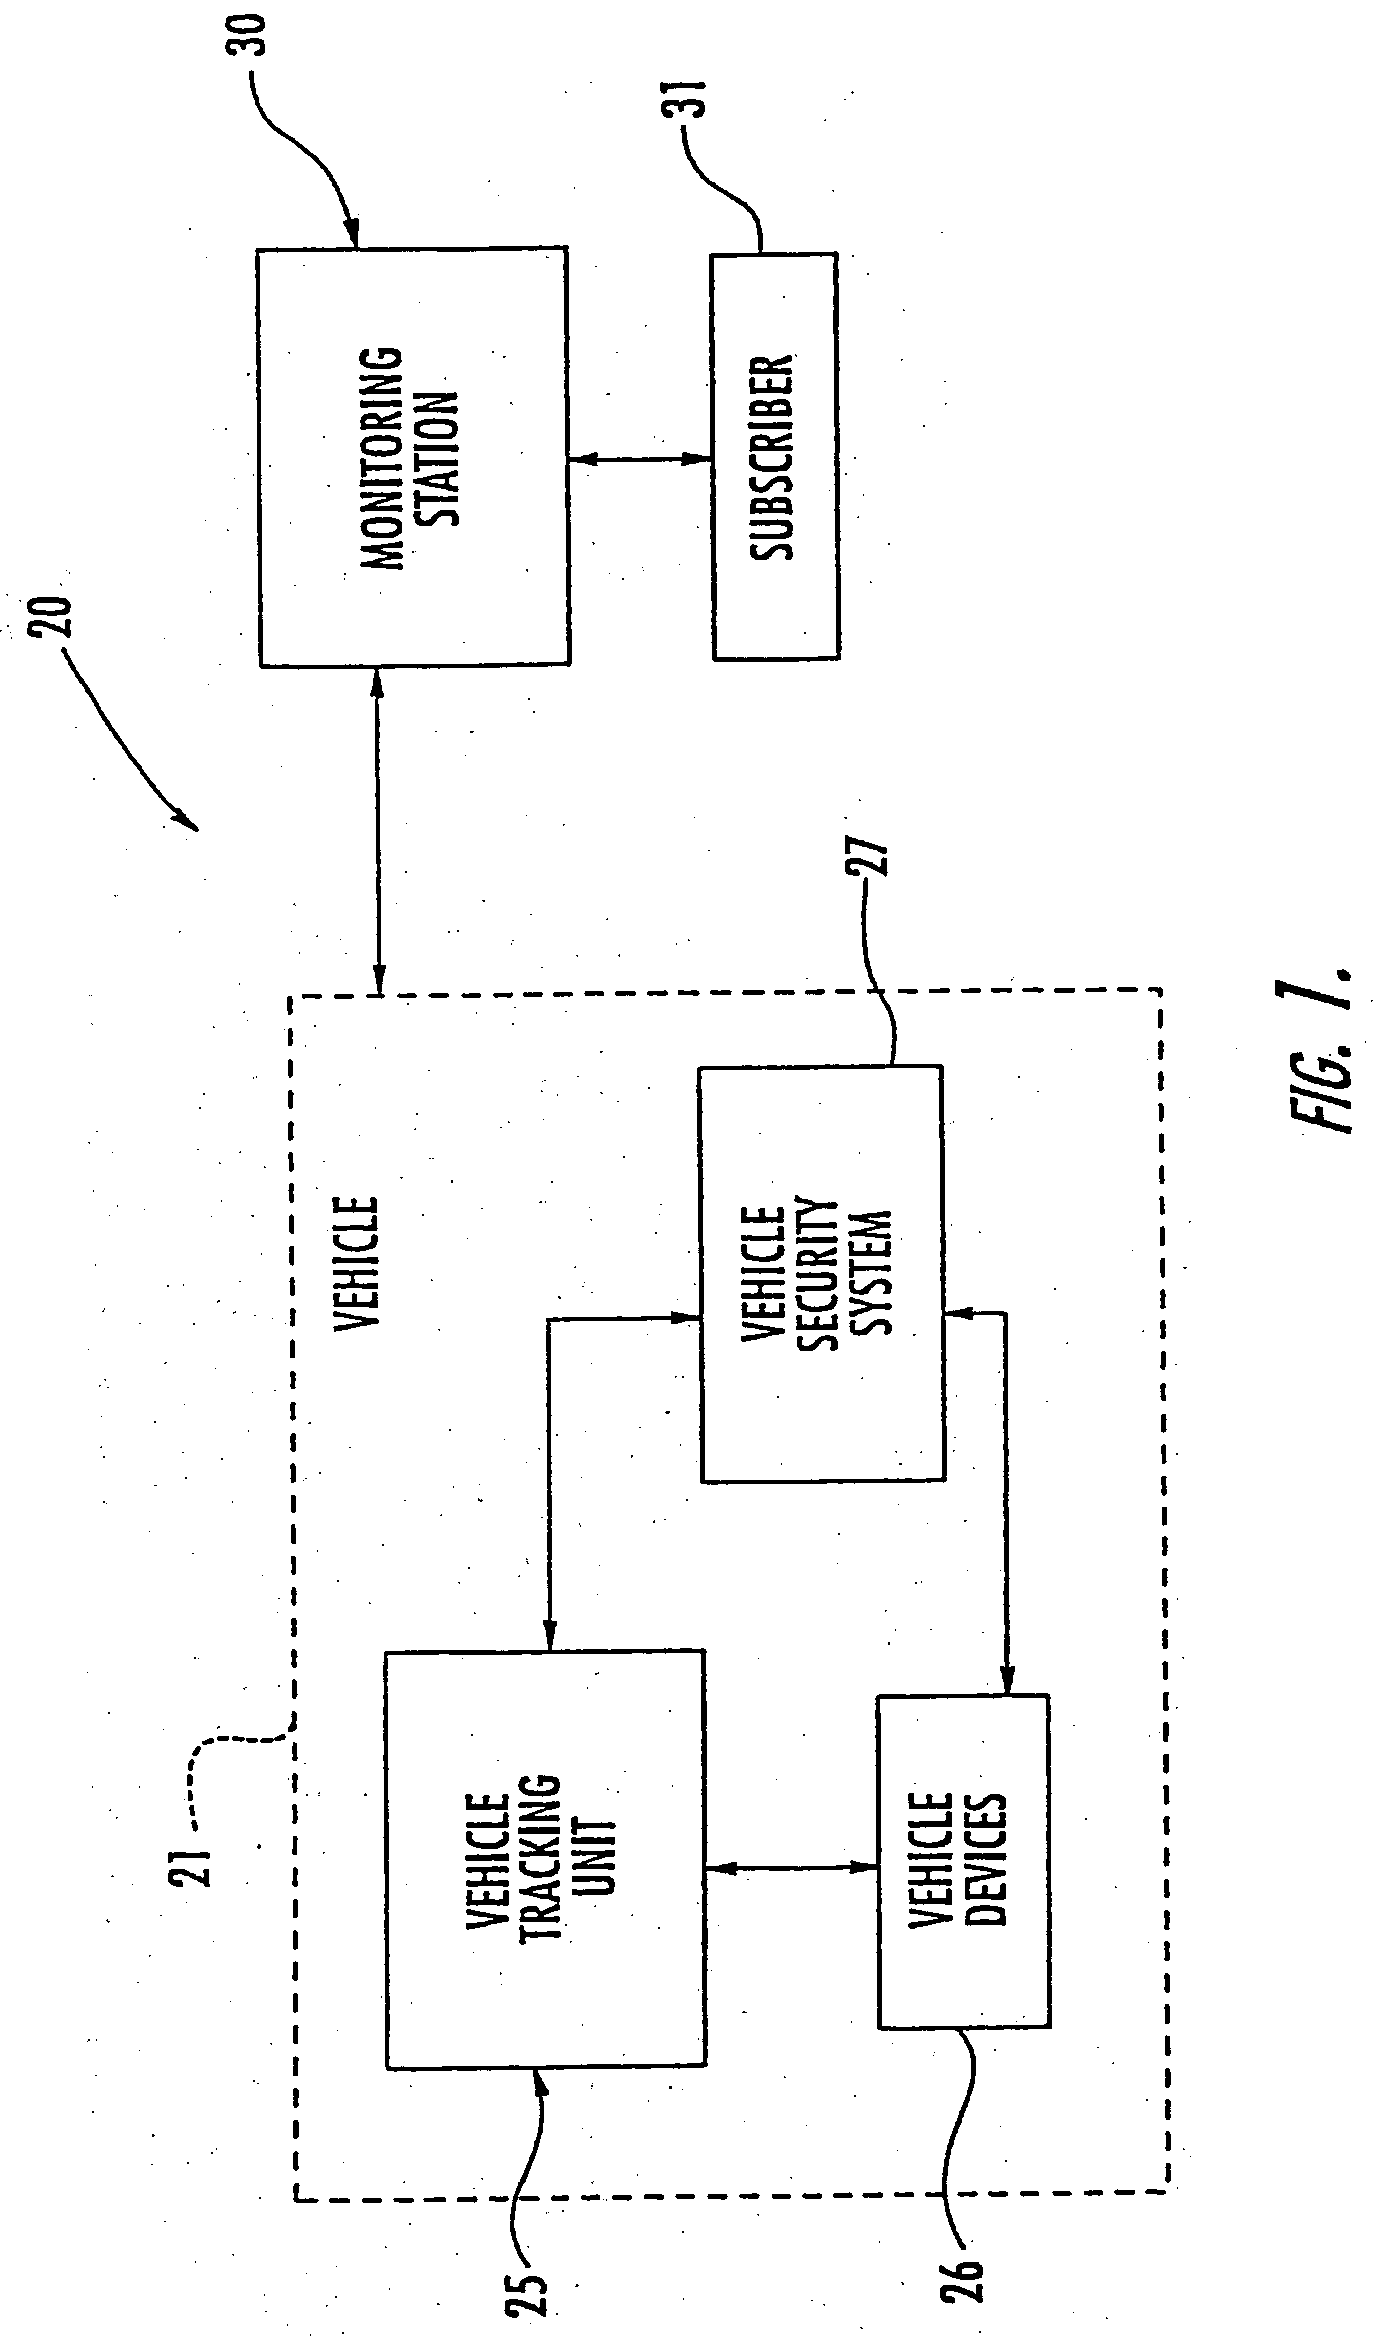 Vehicle tracker including input/output features and related methods